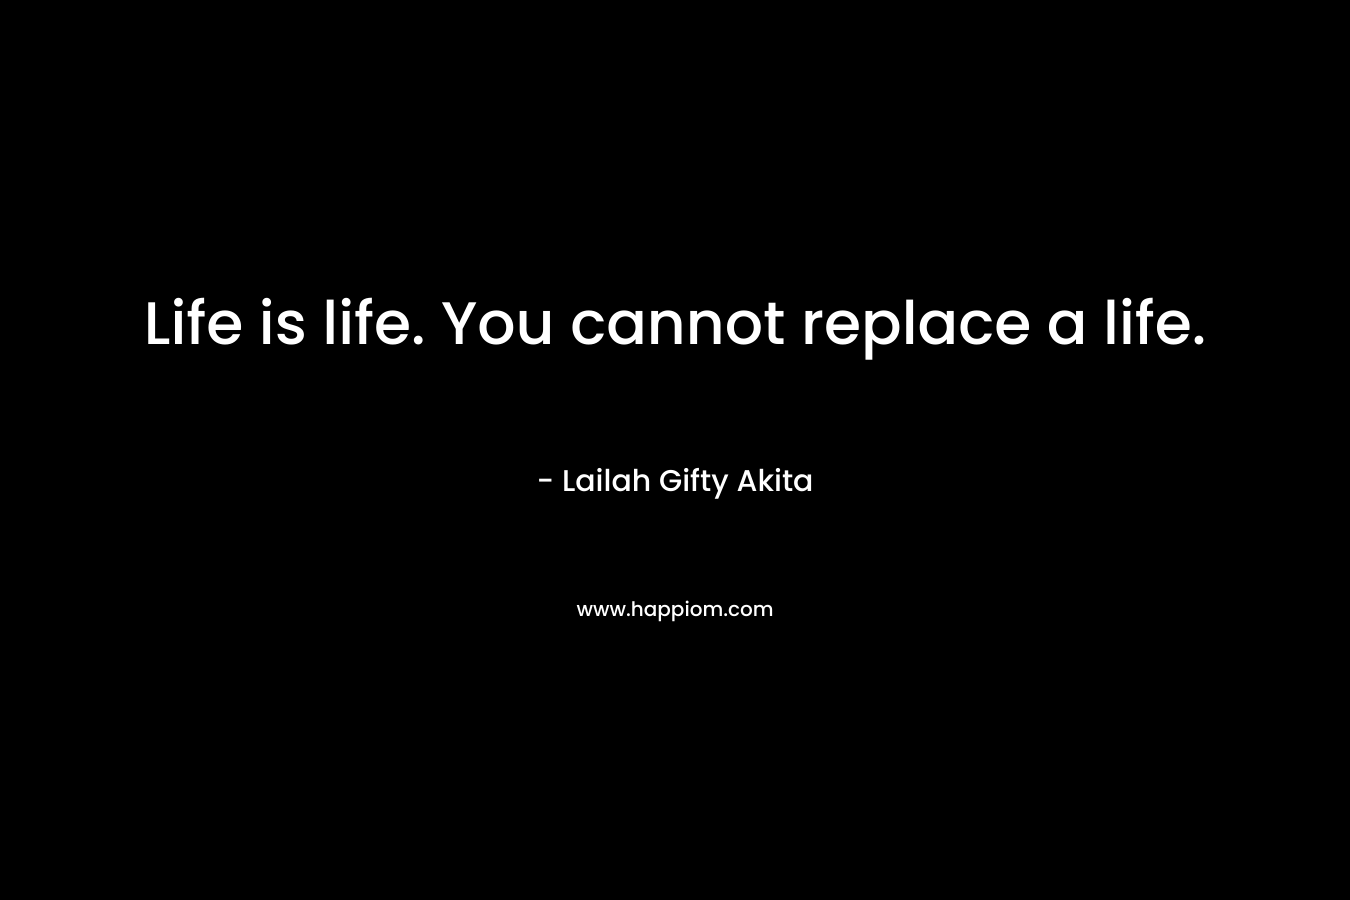 Life is life. You cannot replace a life.